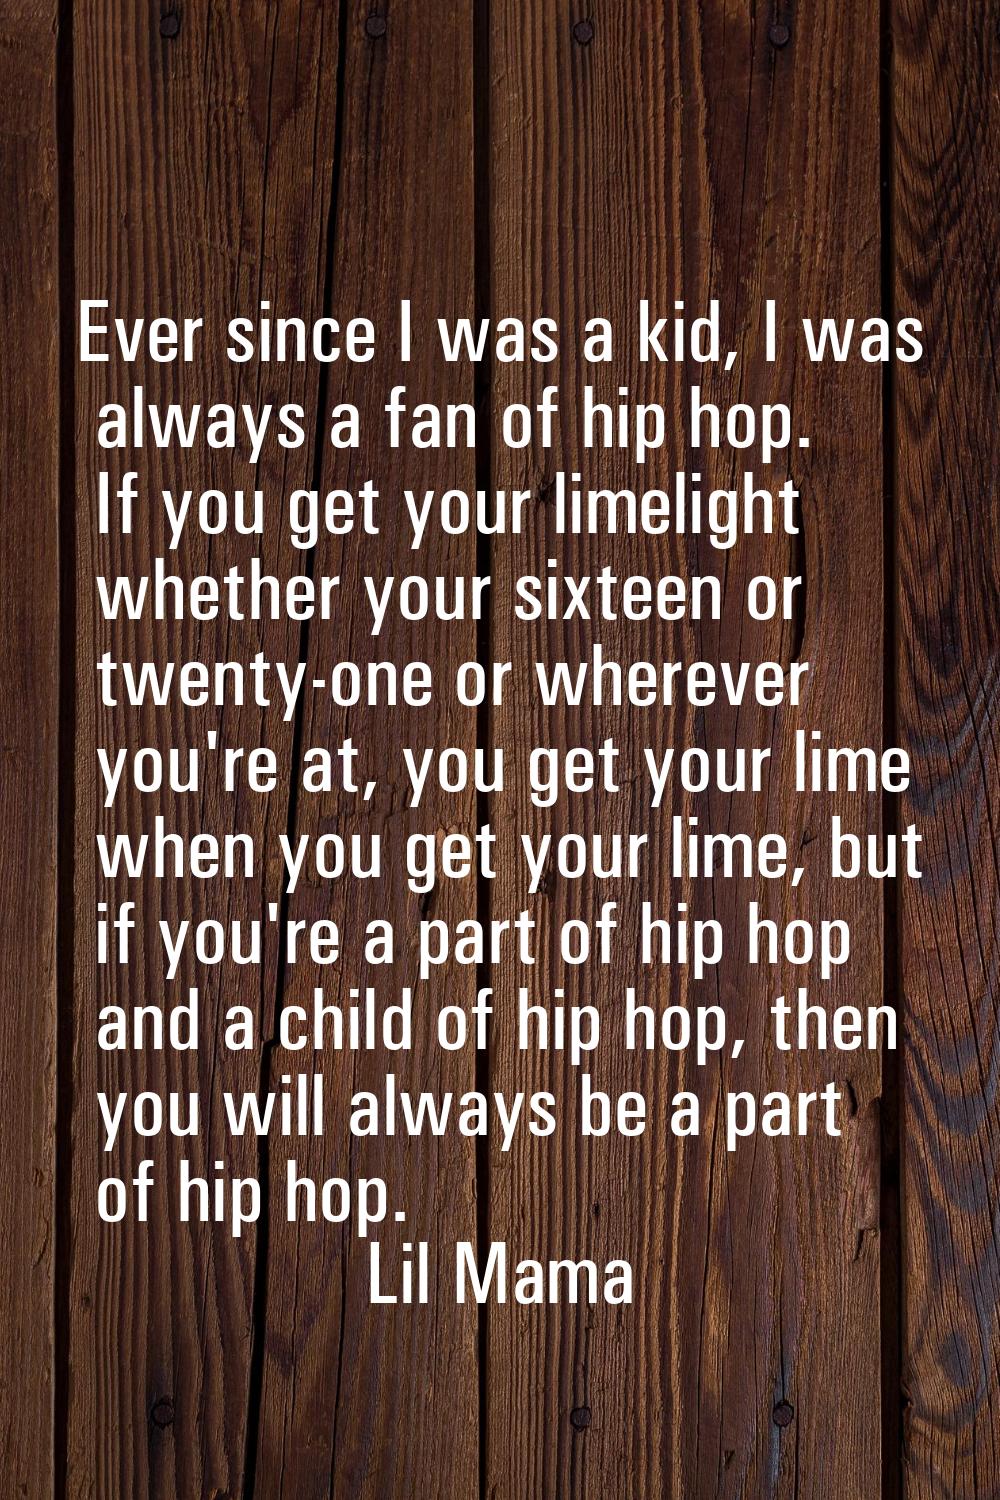 Ever since I was a kid, I was always a fan of hip hop. If you get your limelight whether your sixte